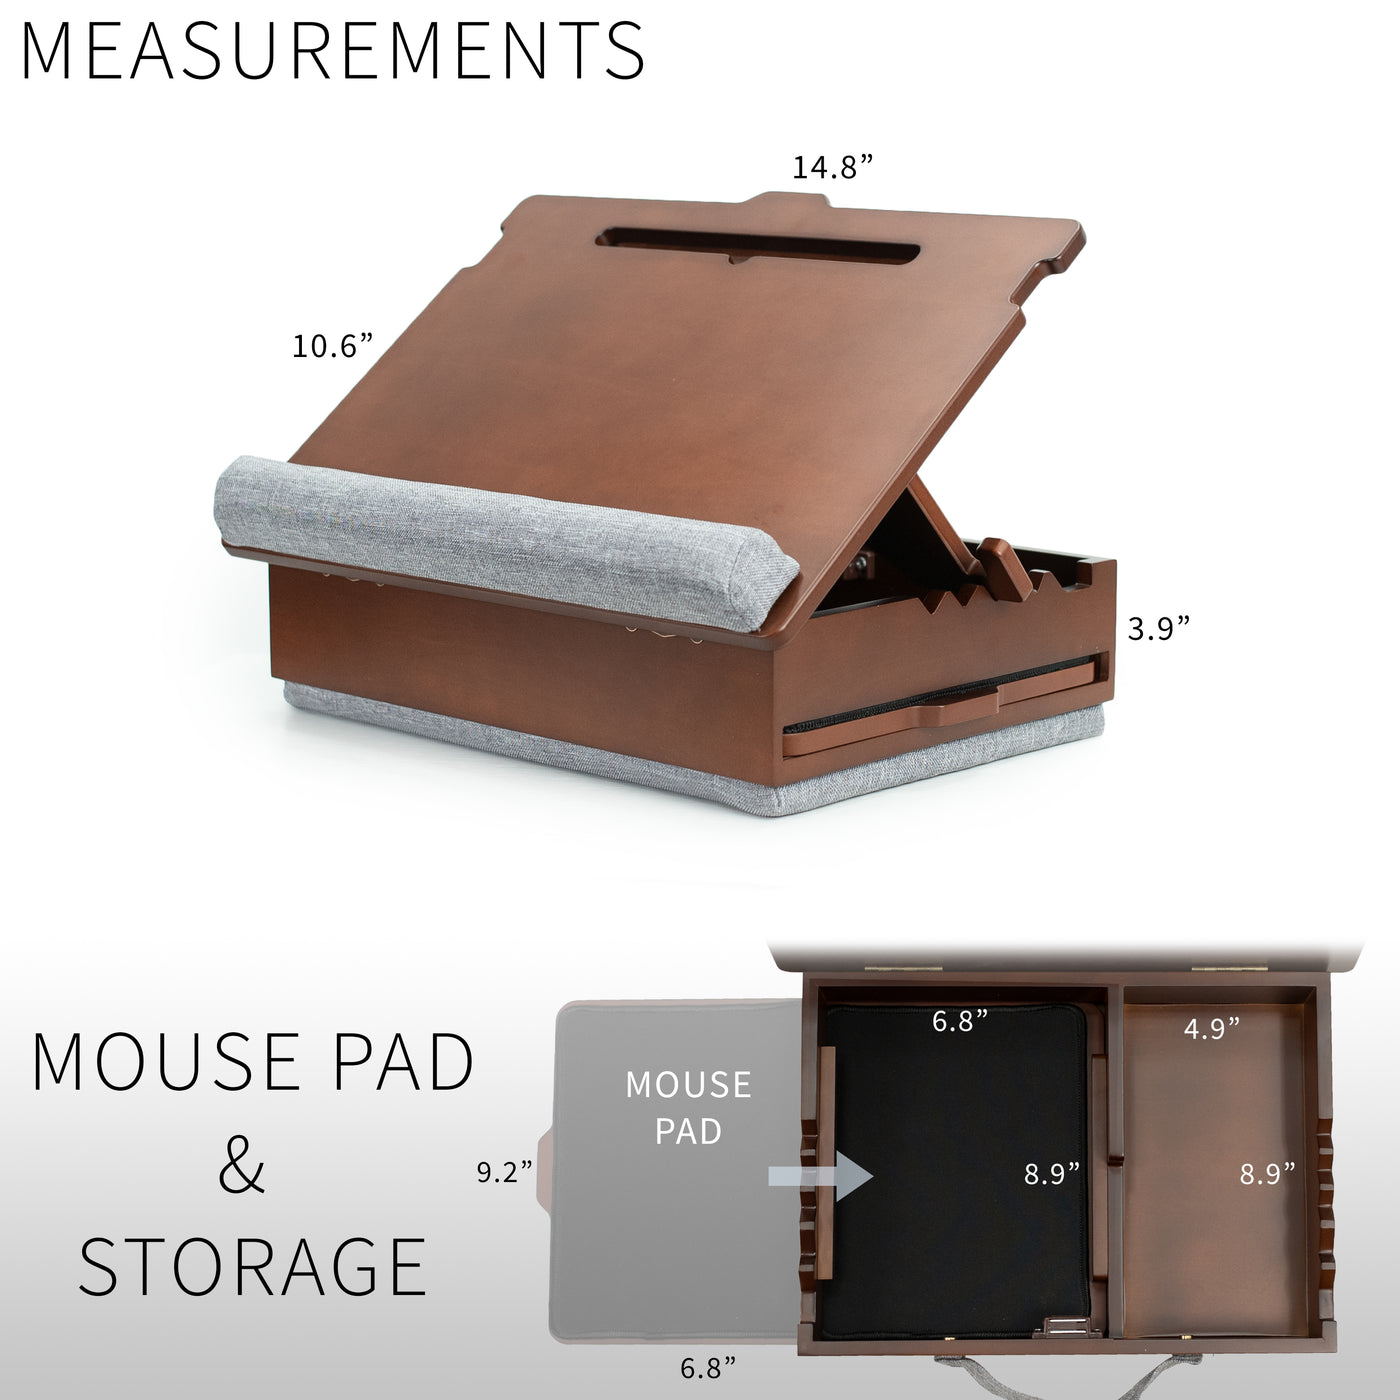 Wooden Lap Desk with Storage and Mouse Pad